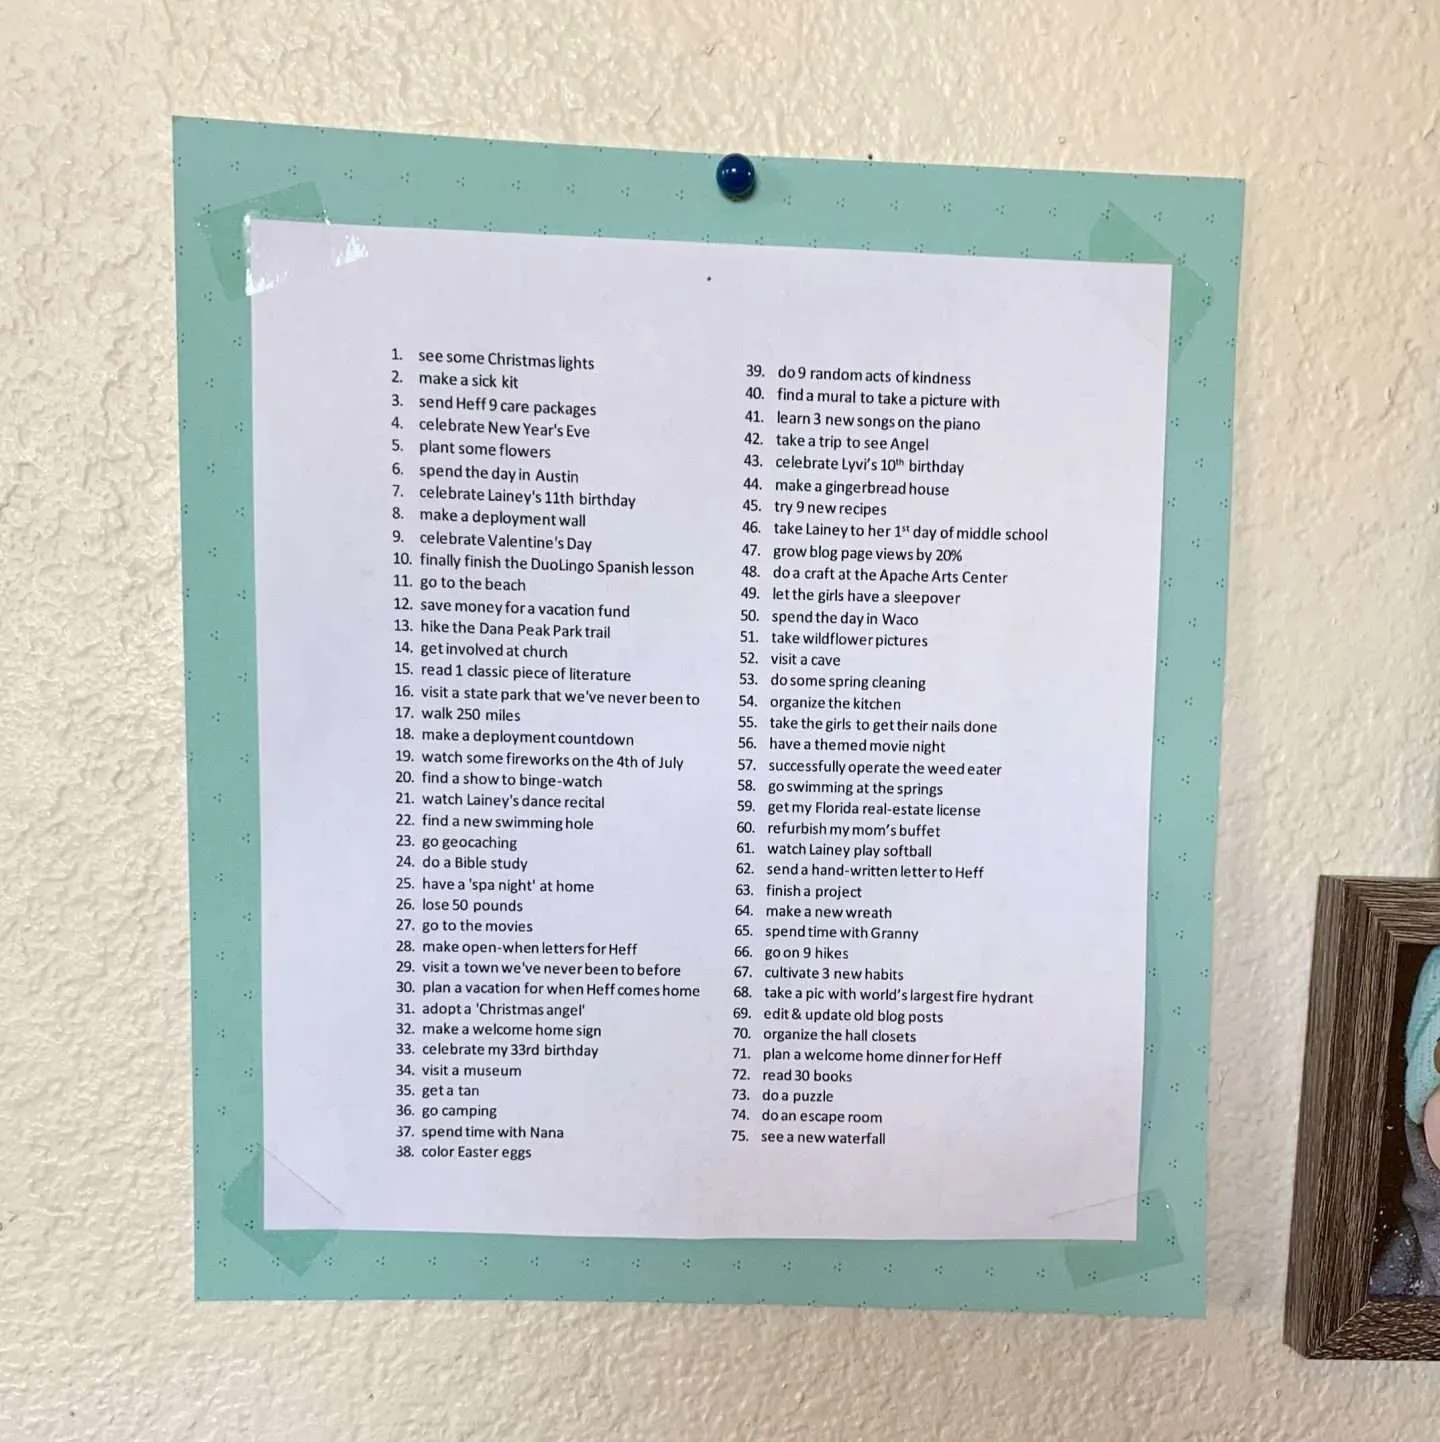 Don't forget to add your deployment bucket list to your deployment wall. 